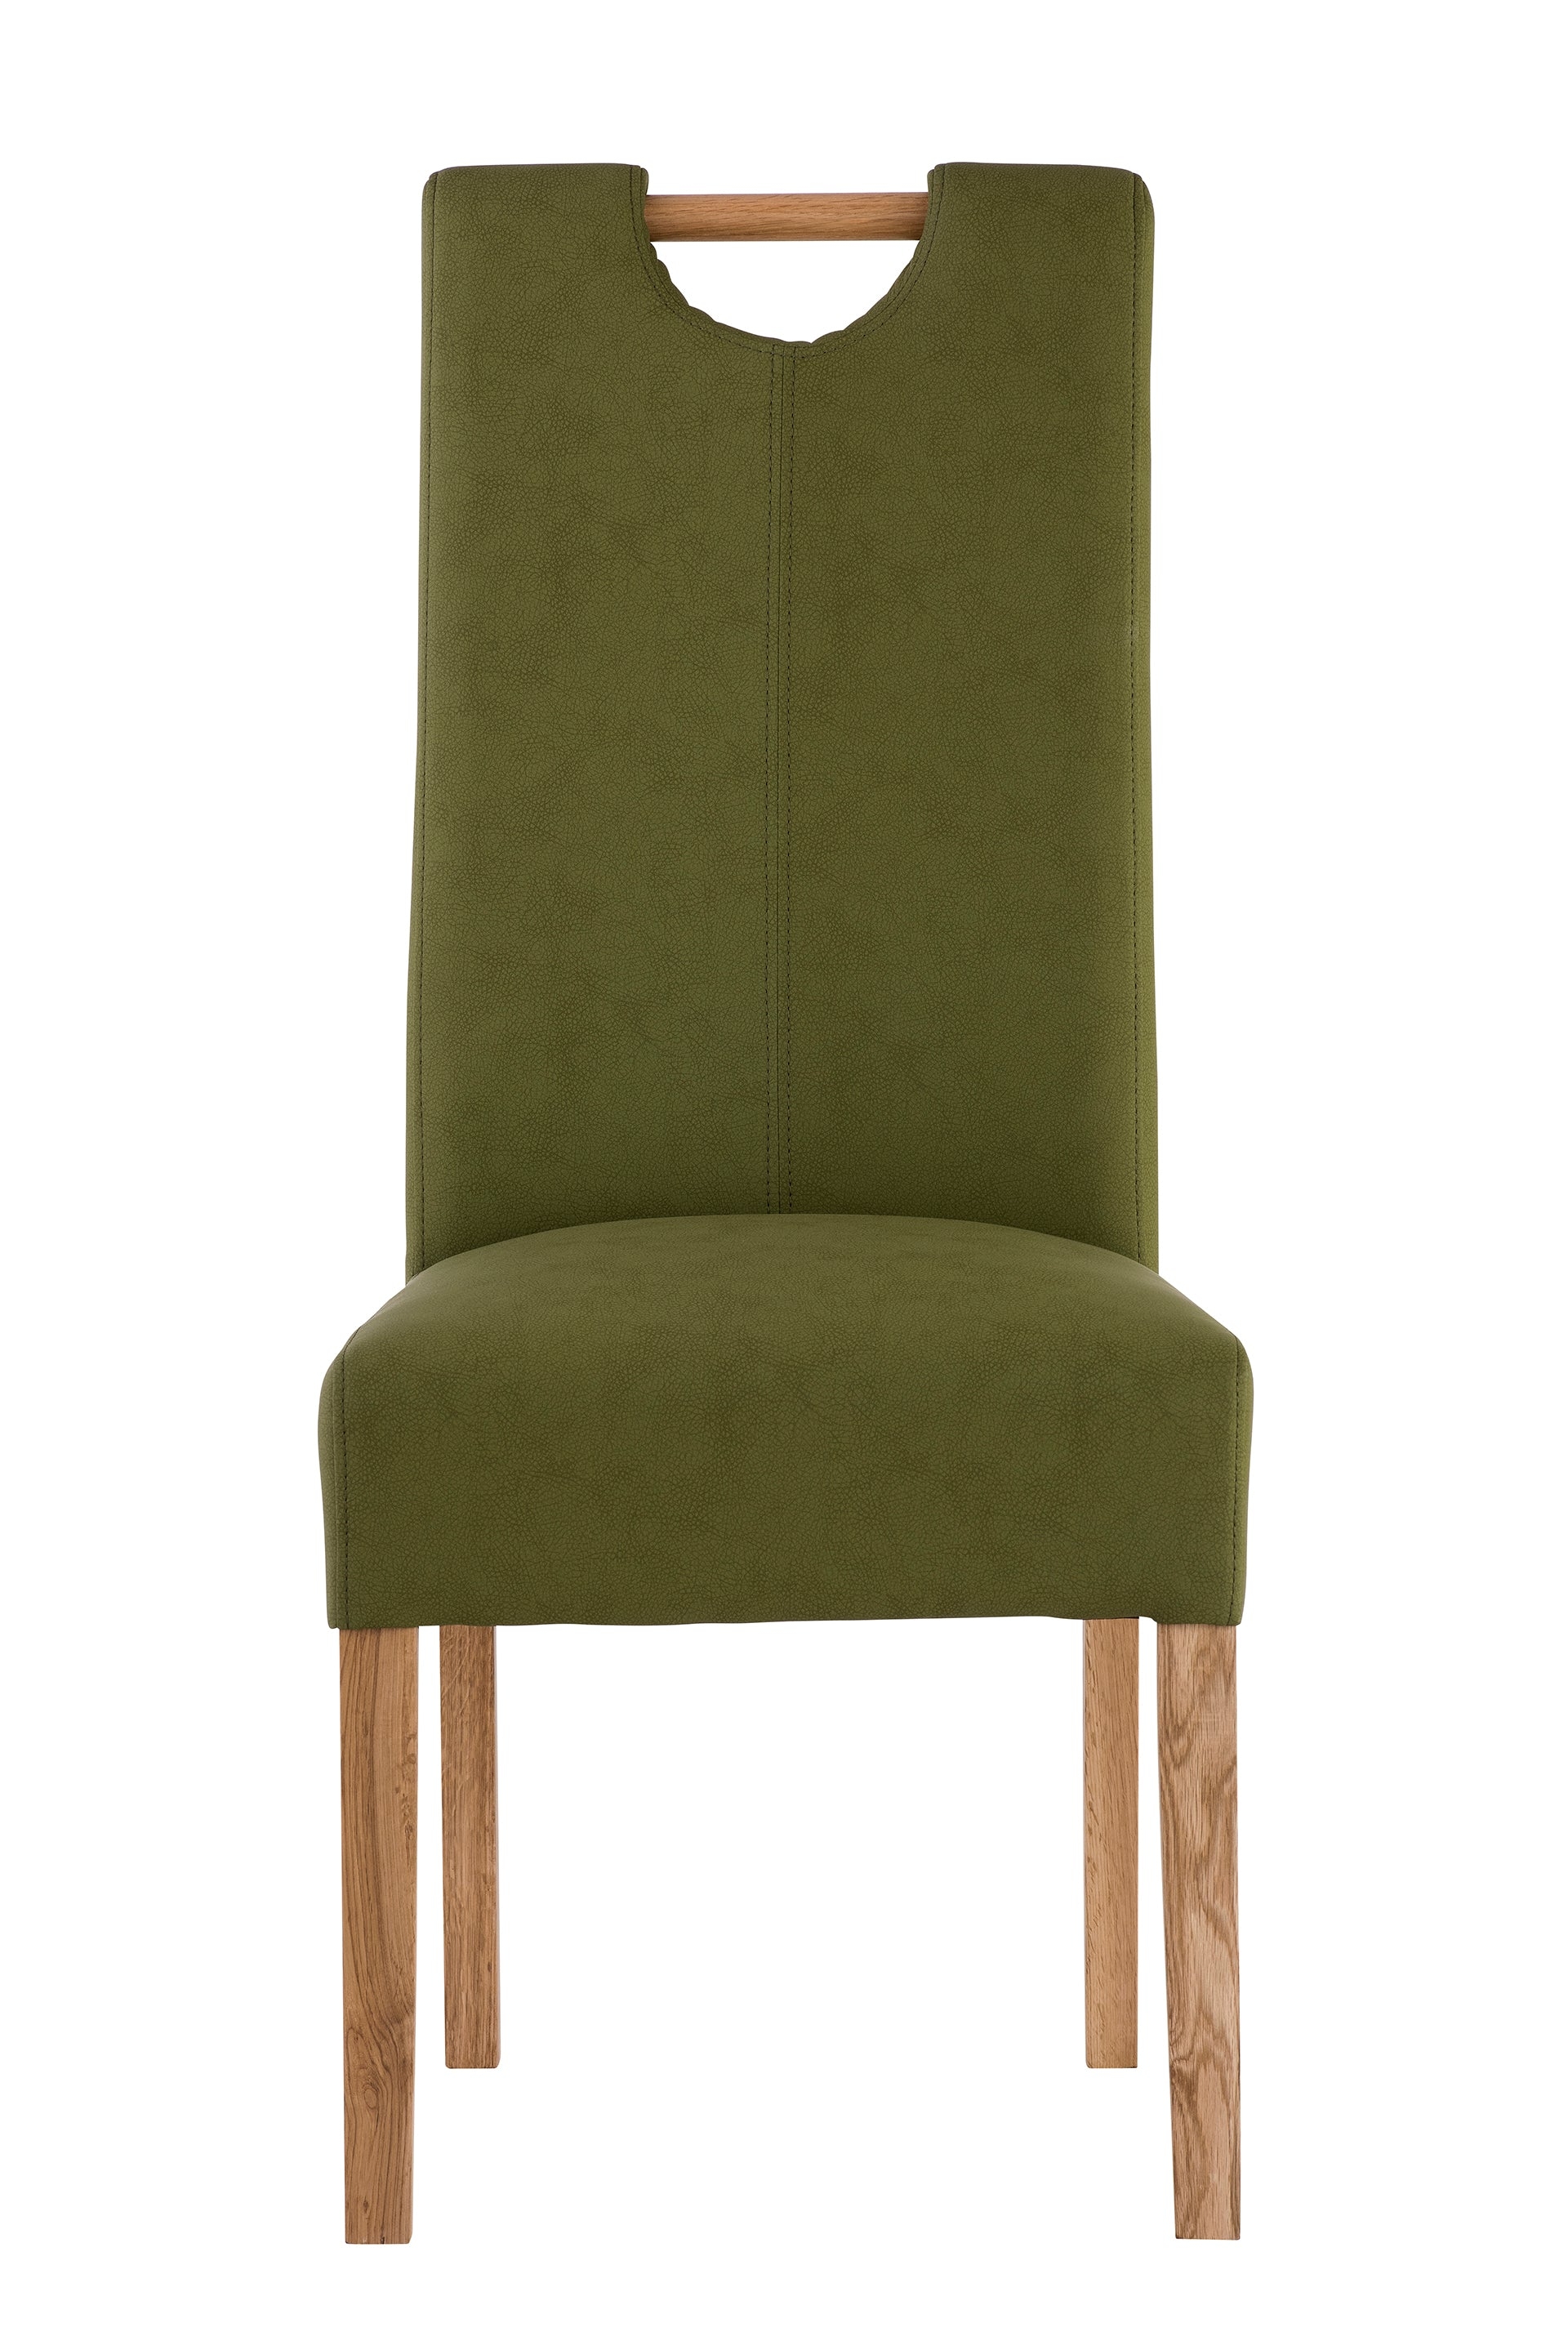 Kingston Solid Oak Legs Dining Chair (Pairs), Sage Green – Lc Living